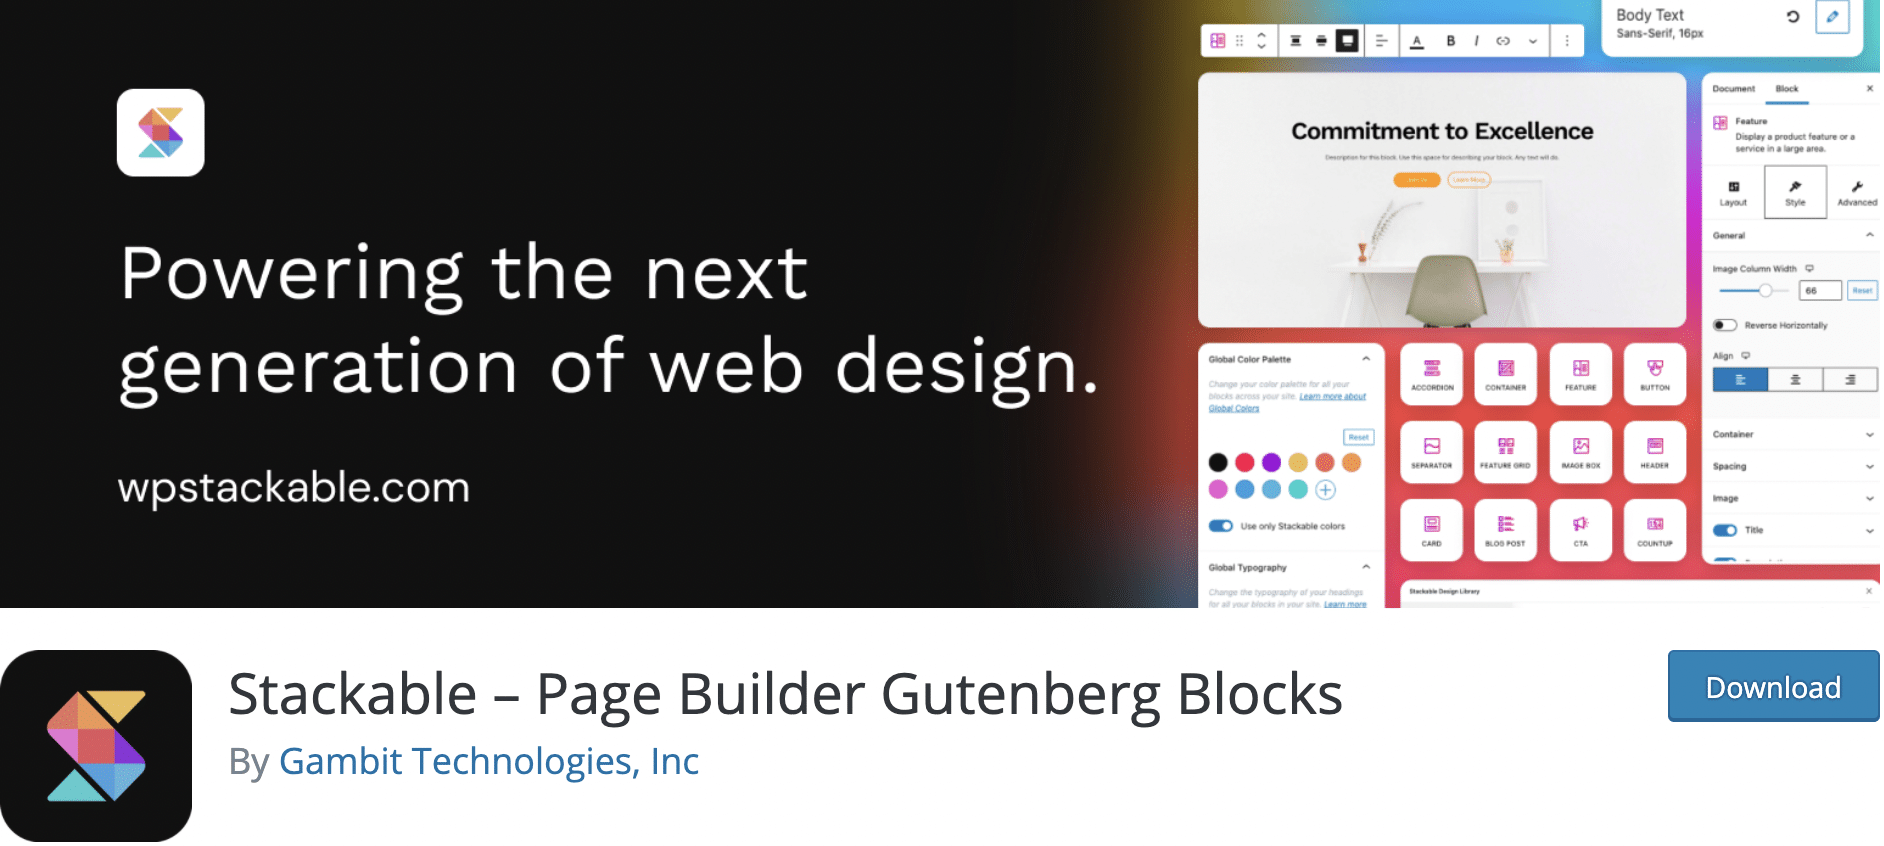 Stackable Page Builder Gutenberg Blocks to download on the official WordPress plugin directory.